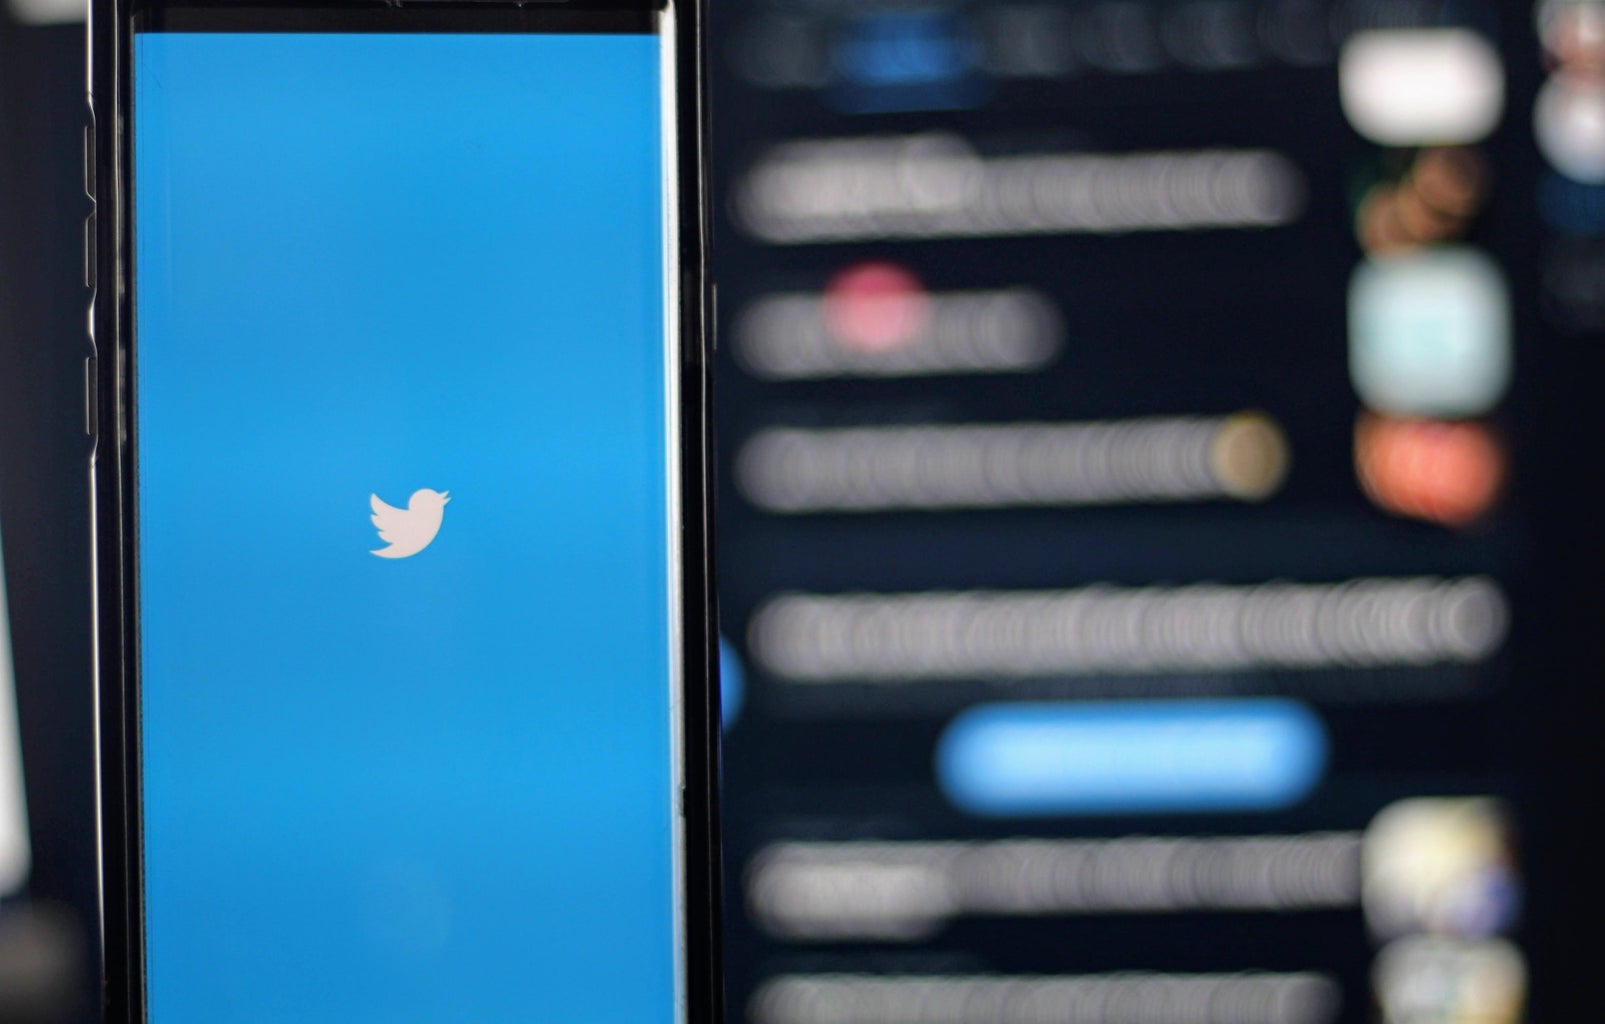 Twitter logo in front of a blurred screen